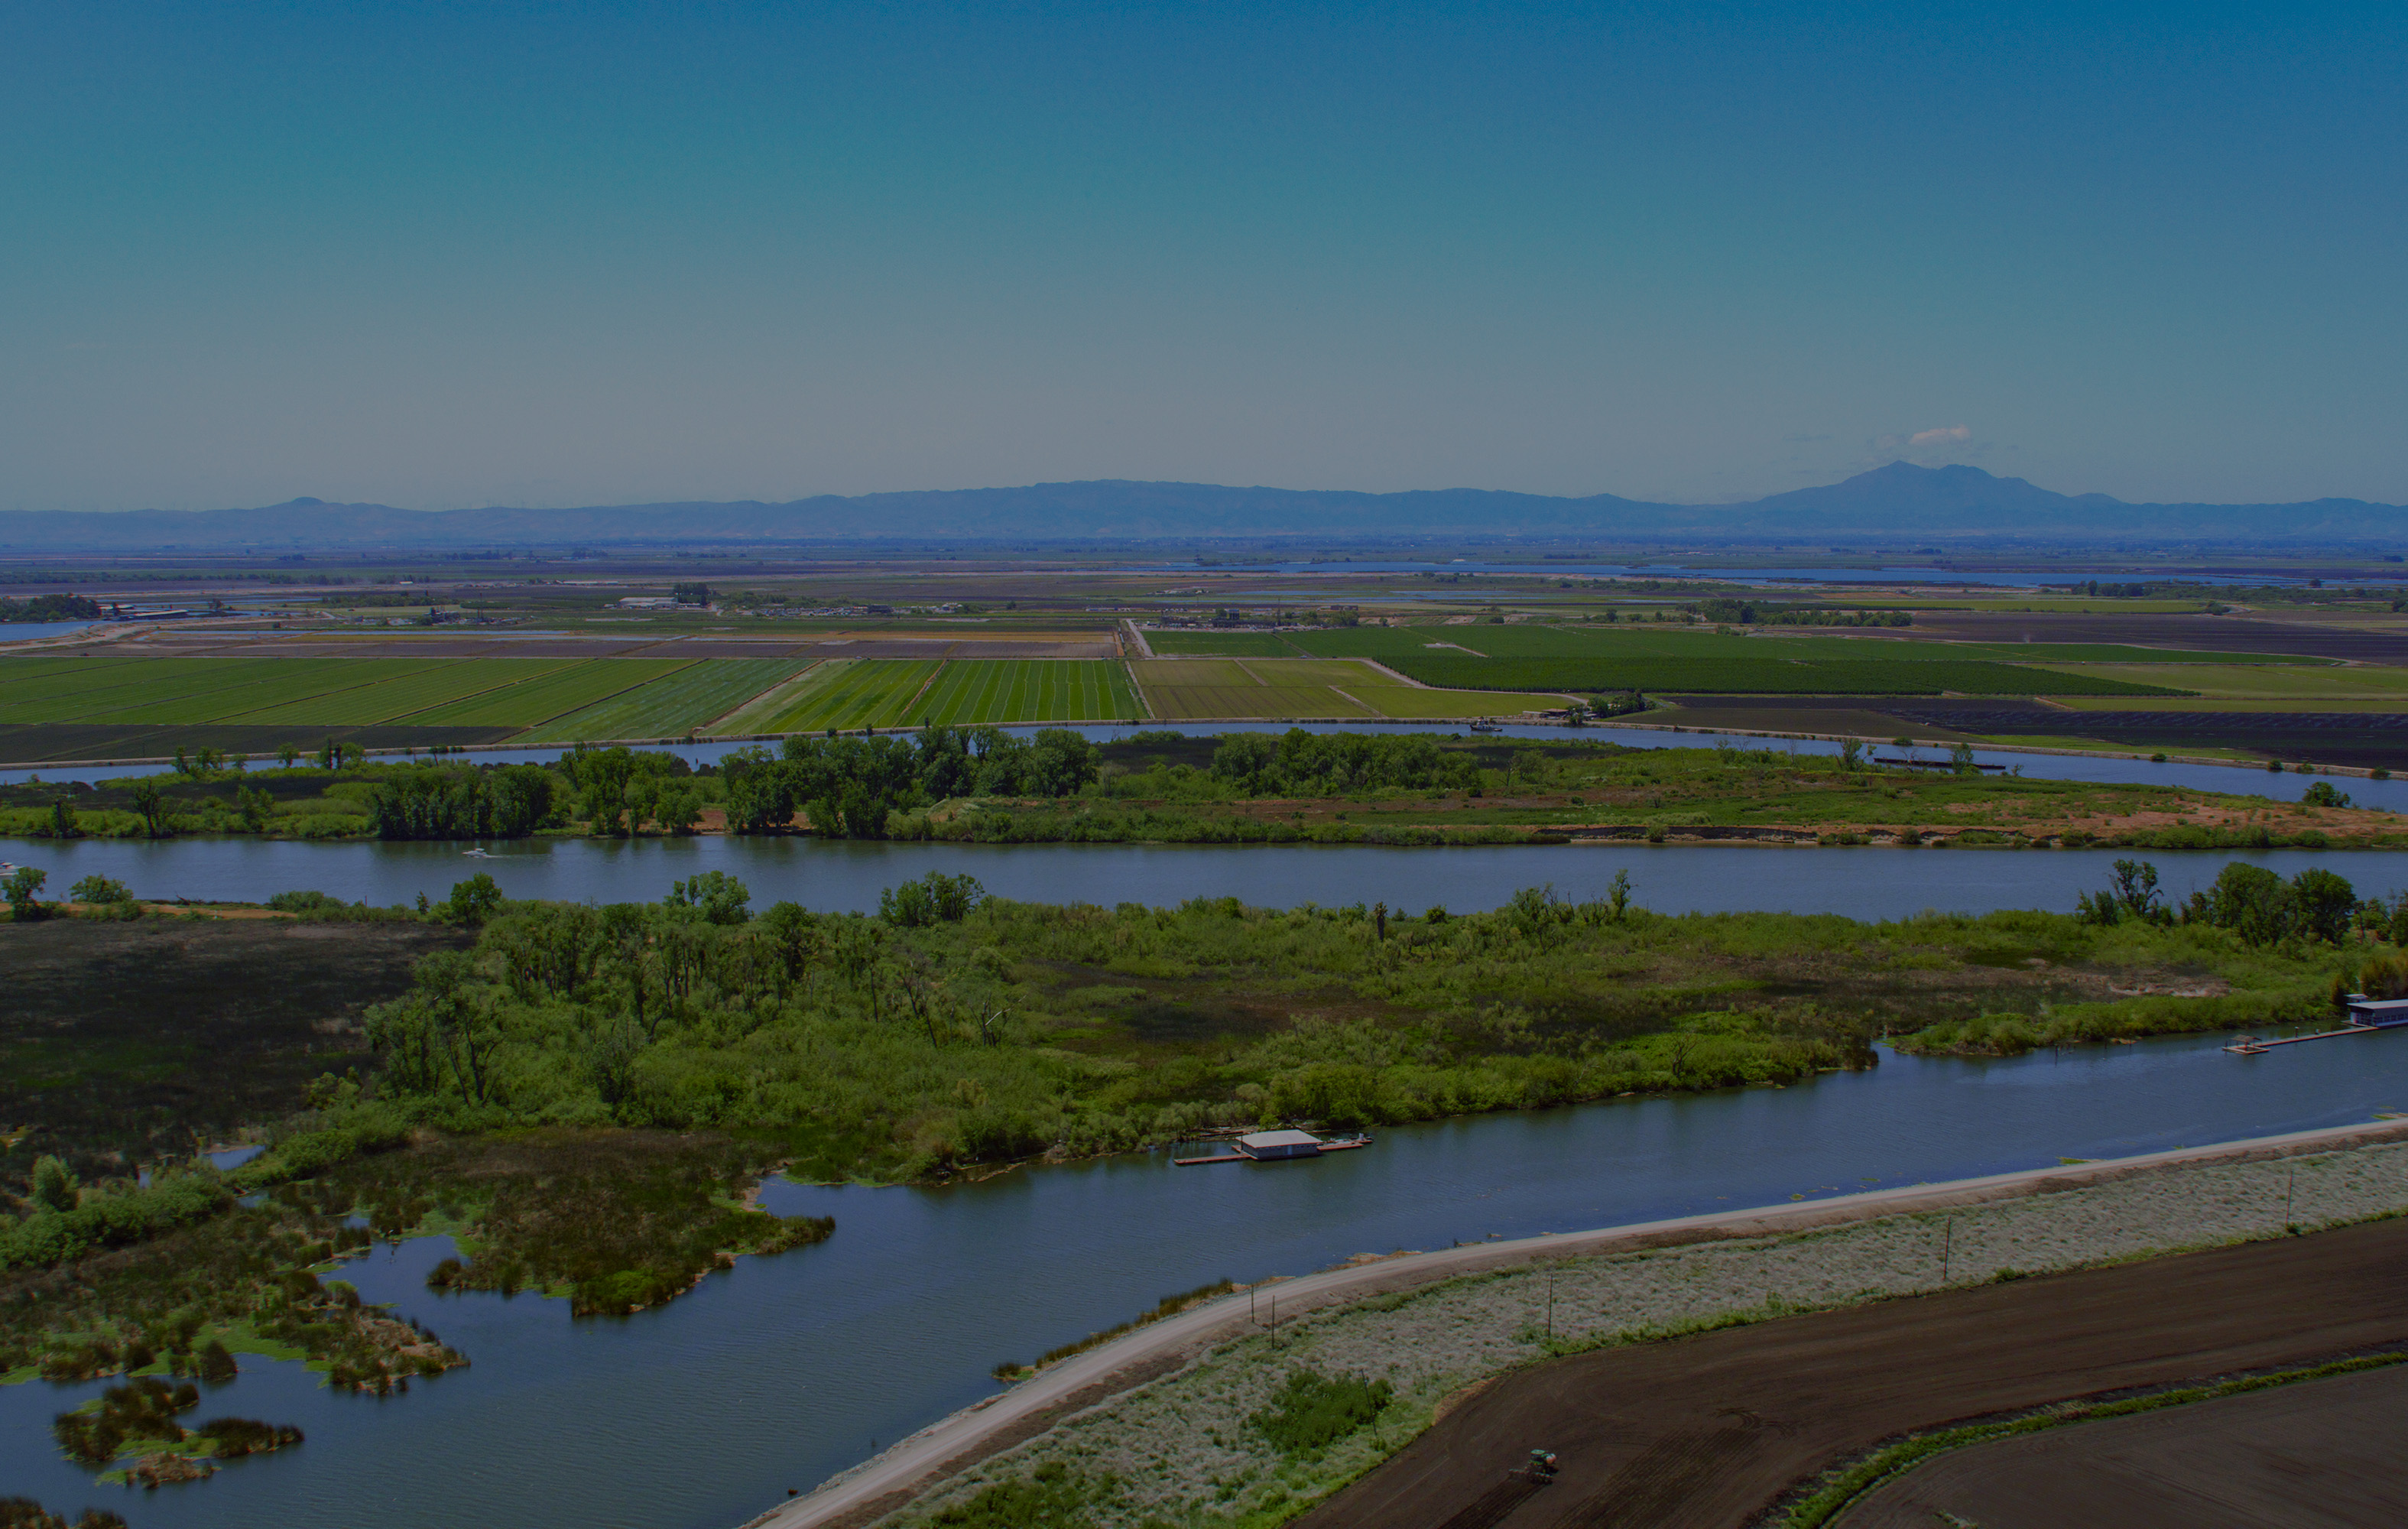 Aerial view looking south west at a section of the San Joaquin River and Weder Point Yacht Club on Hog Island behind is Spud Island, both part of the Sacramento-San Joaquin River Delta in San Joaquin County, California. Photo taken May 11, 2023.